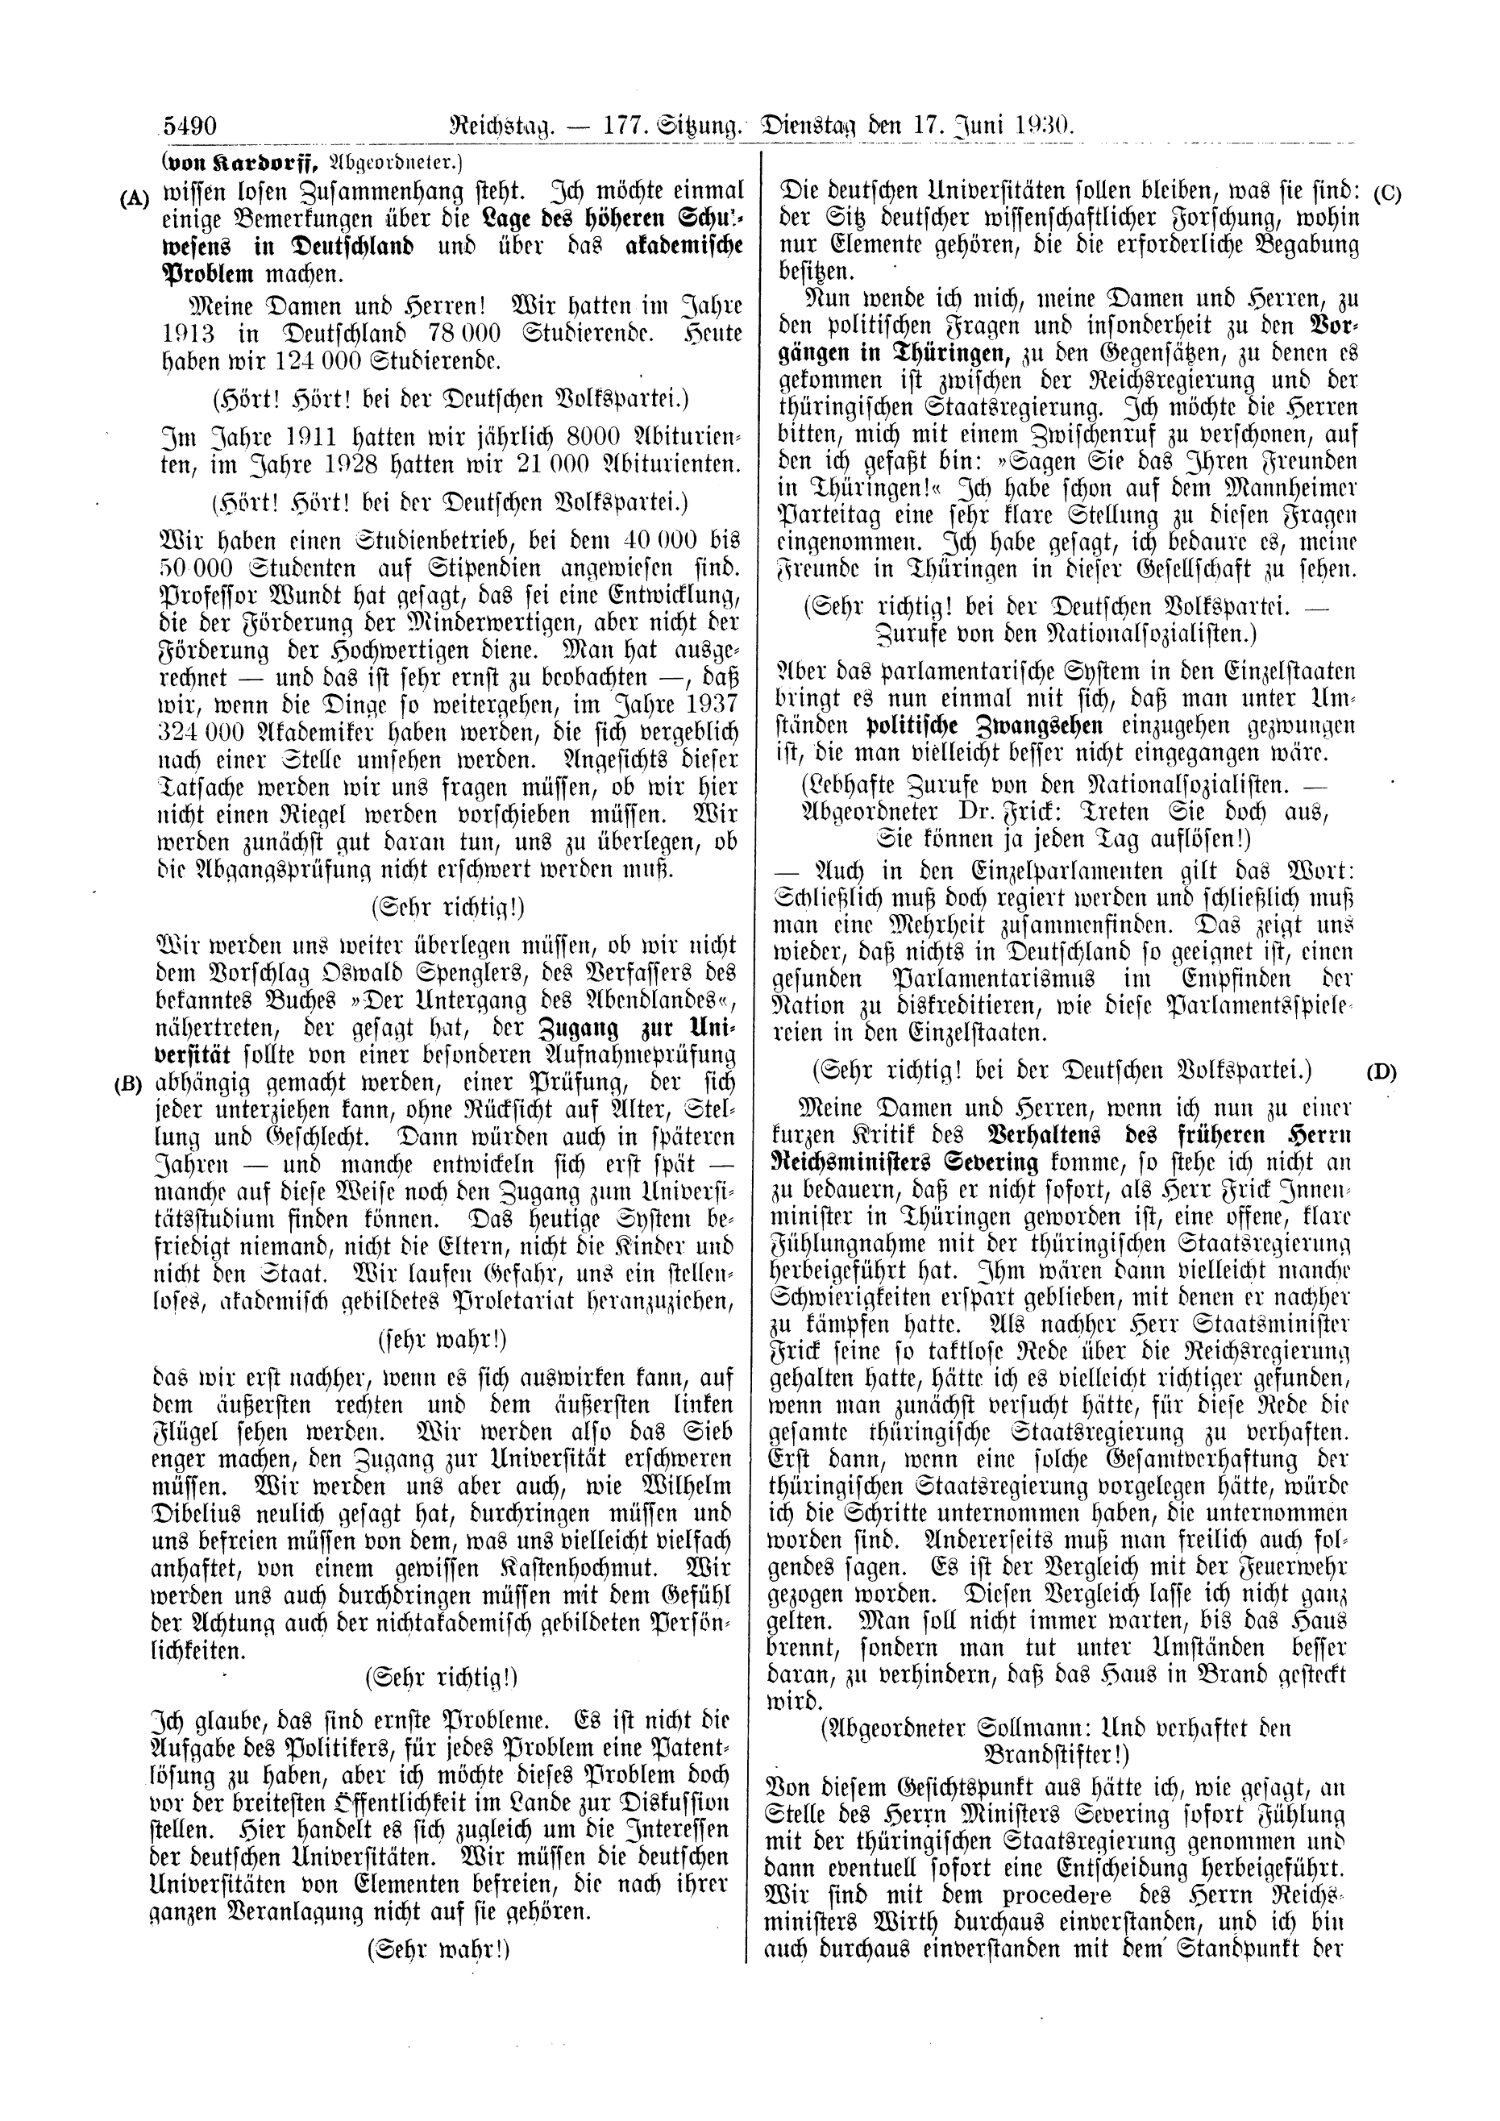 Scan of page 5490